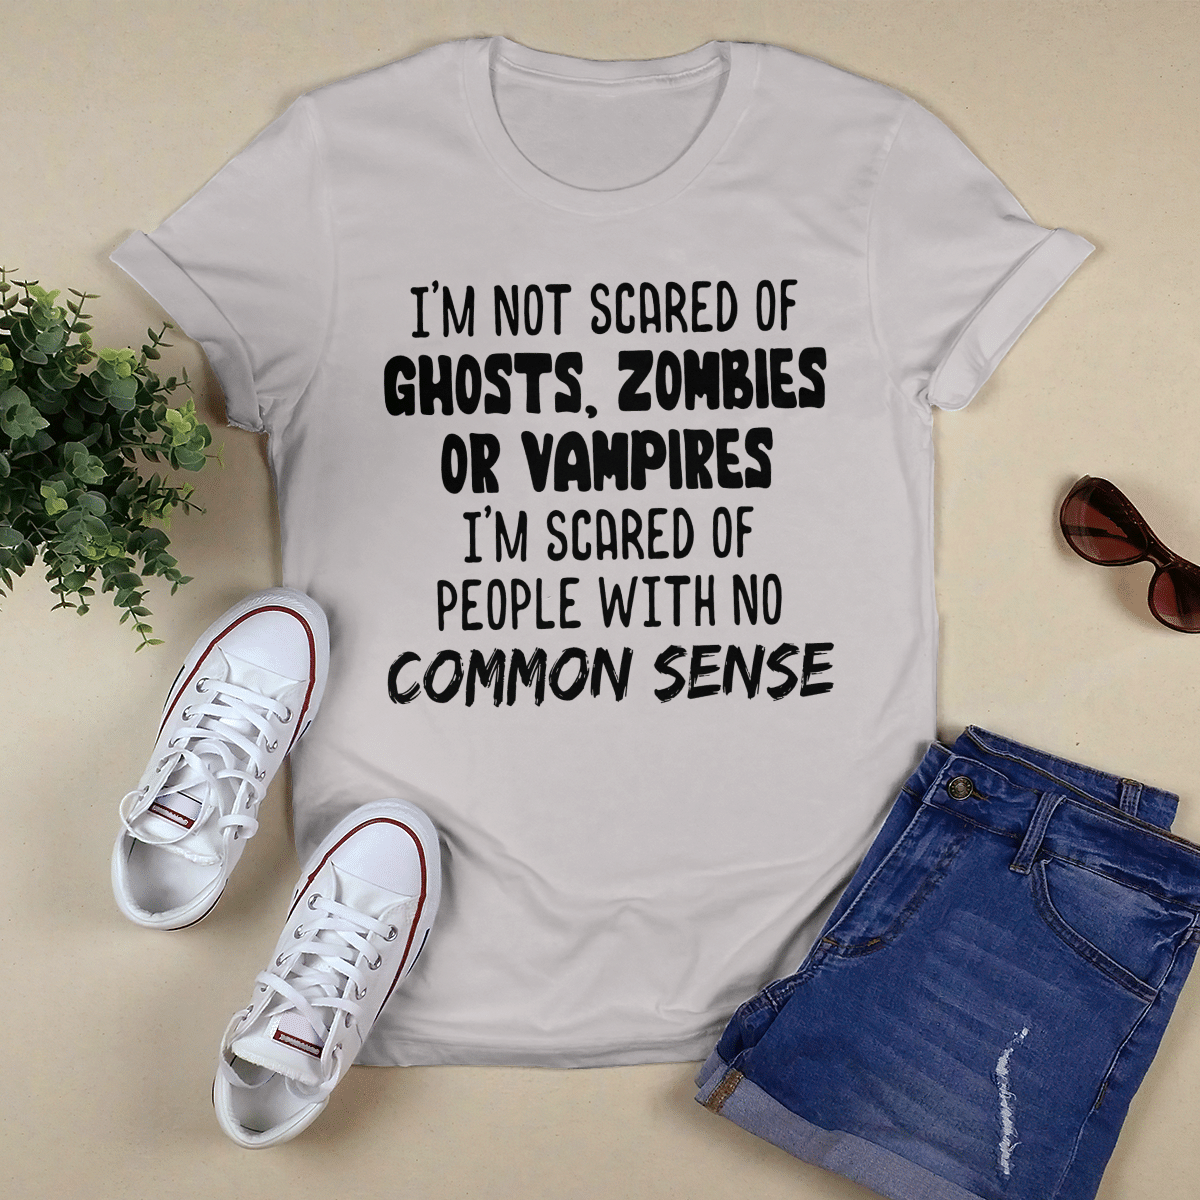 I_m Not Scared Of Ghosts, Zombies Or Vampires shirt